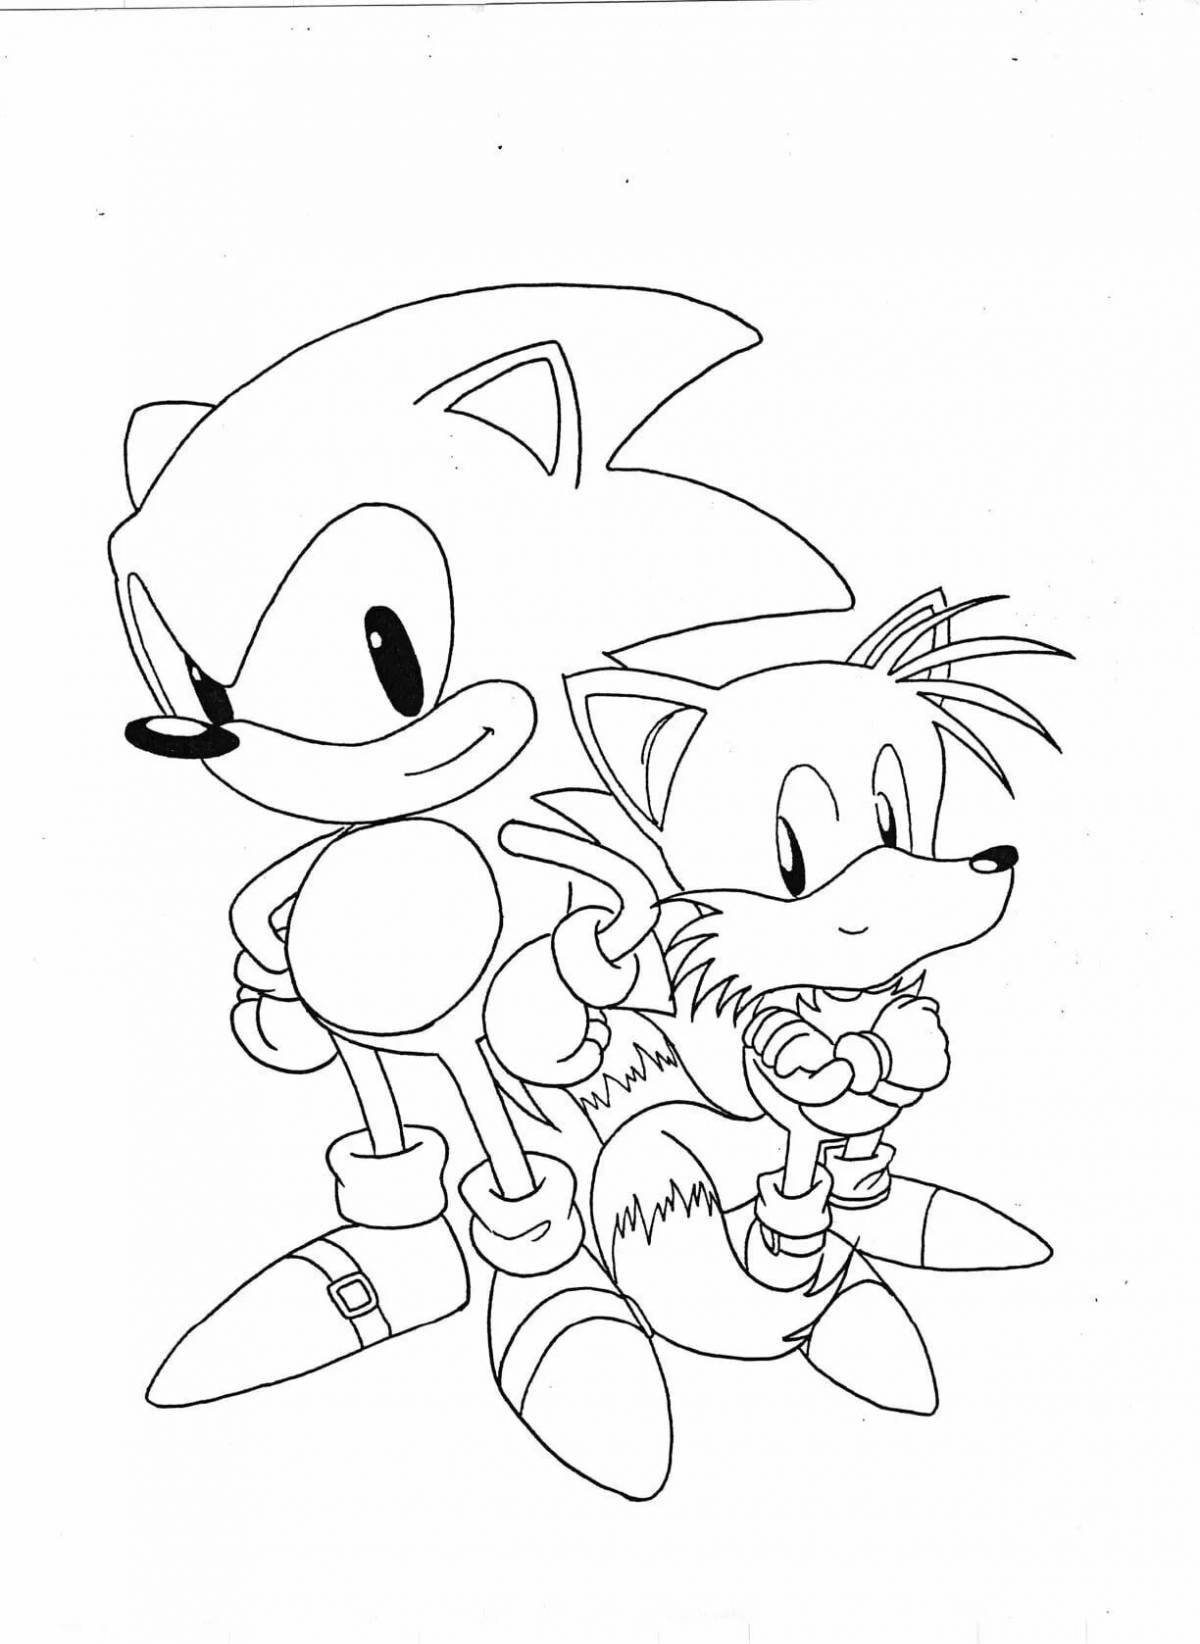 Sonic the hedgehog dazzling coloring book